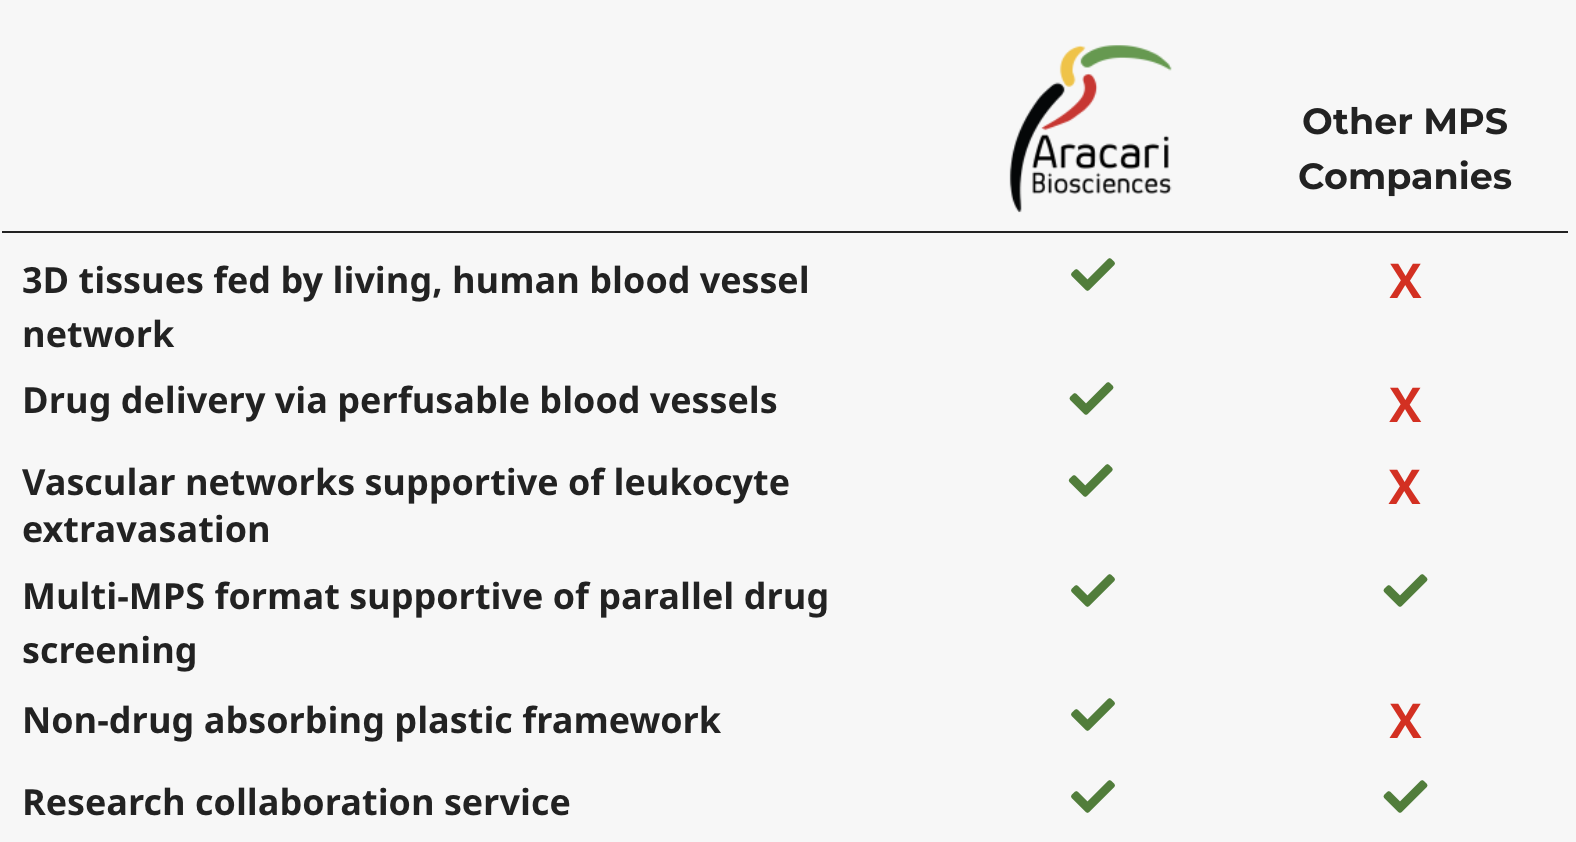 Image of chart showing how Aracari is different from other companies